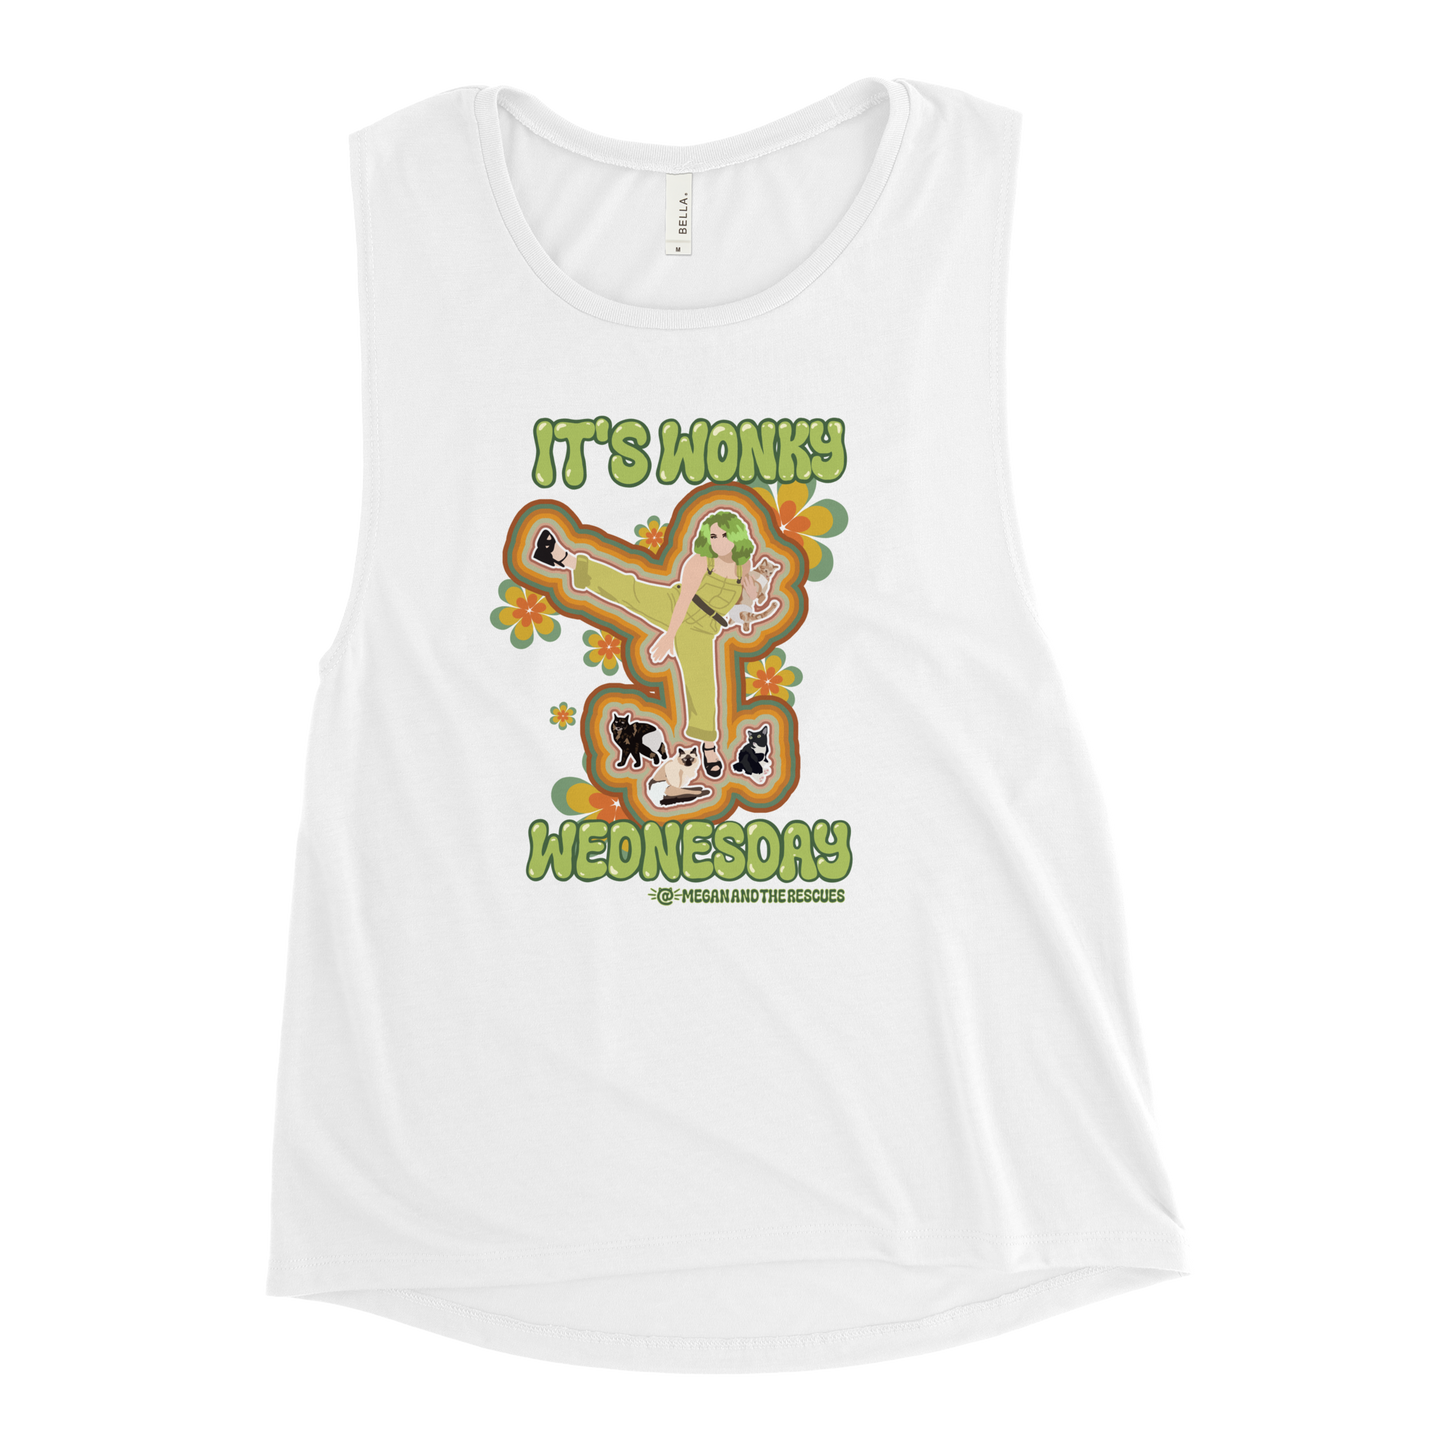 Wonky Wednesday - Ladies’ Muscle Tank